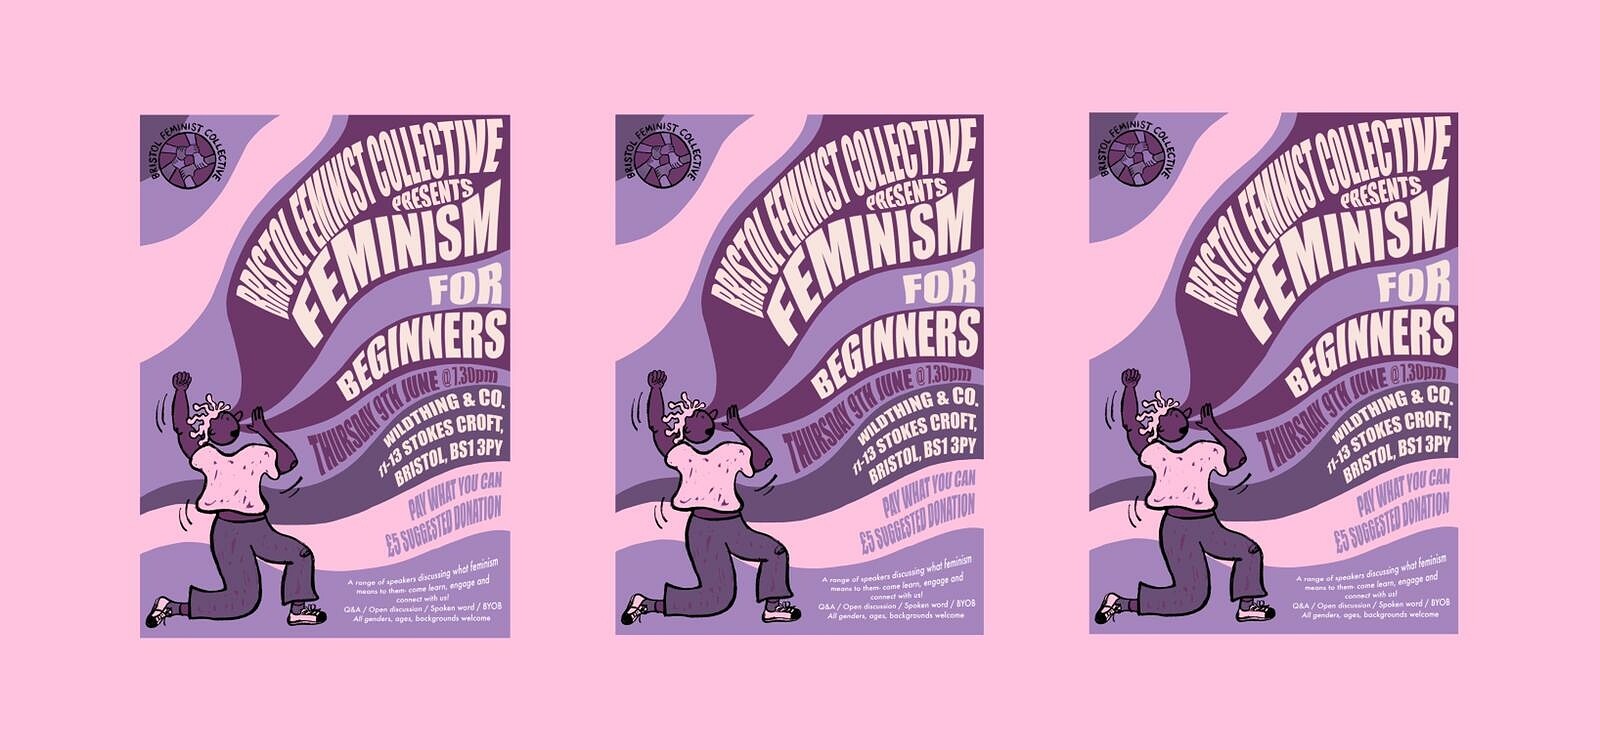 Feminism For Beginners at Wildthing & Co., Stokes Croft